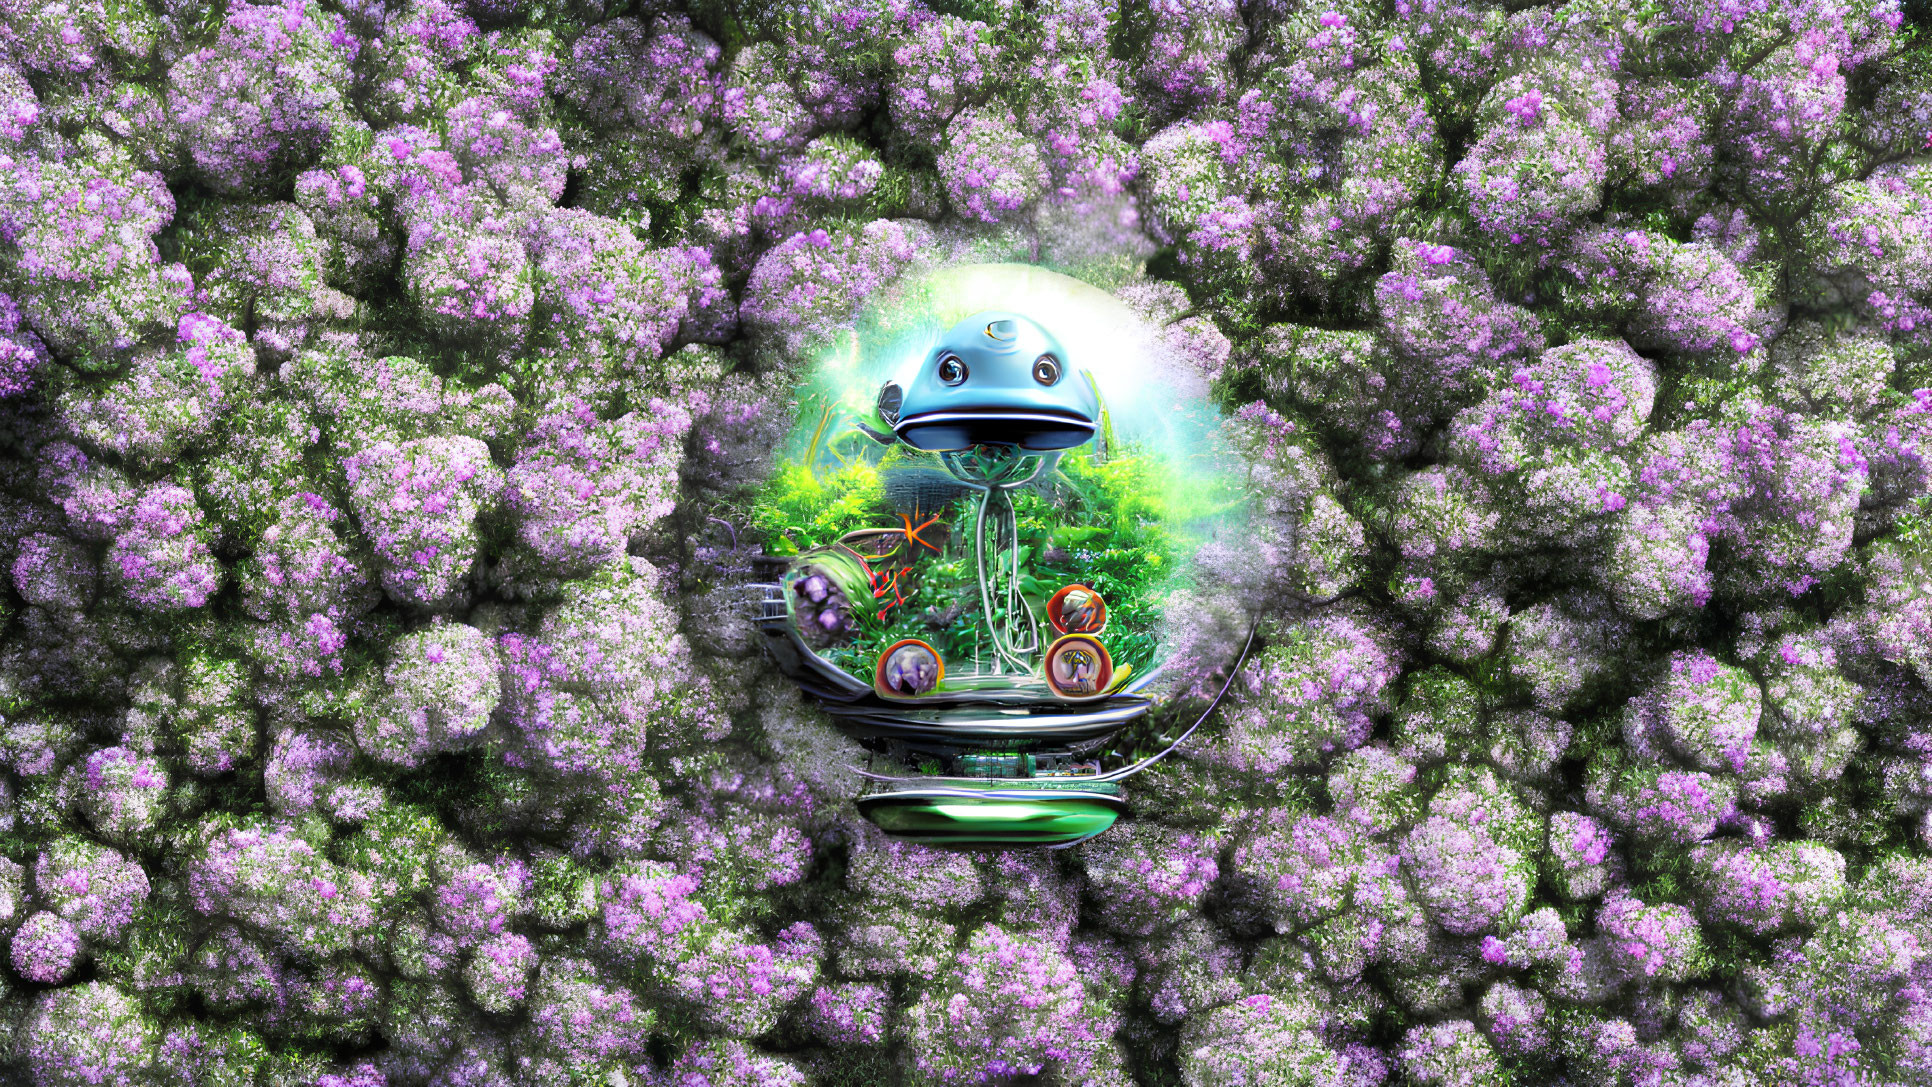 Illustration: Robot watering plants in glass dome among purple flowers